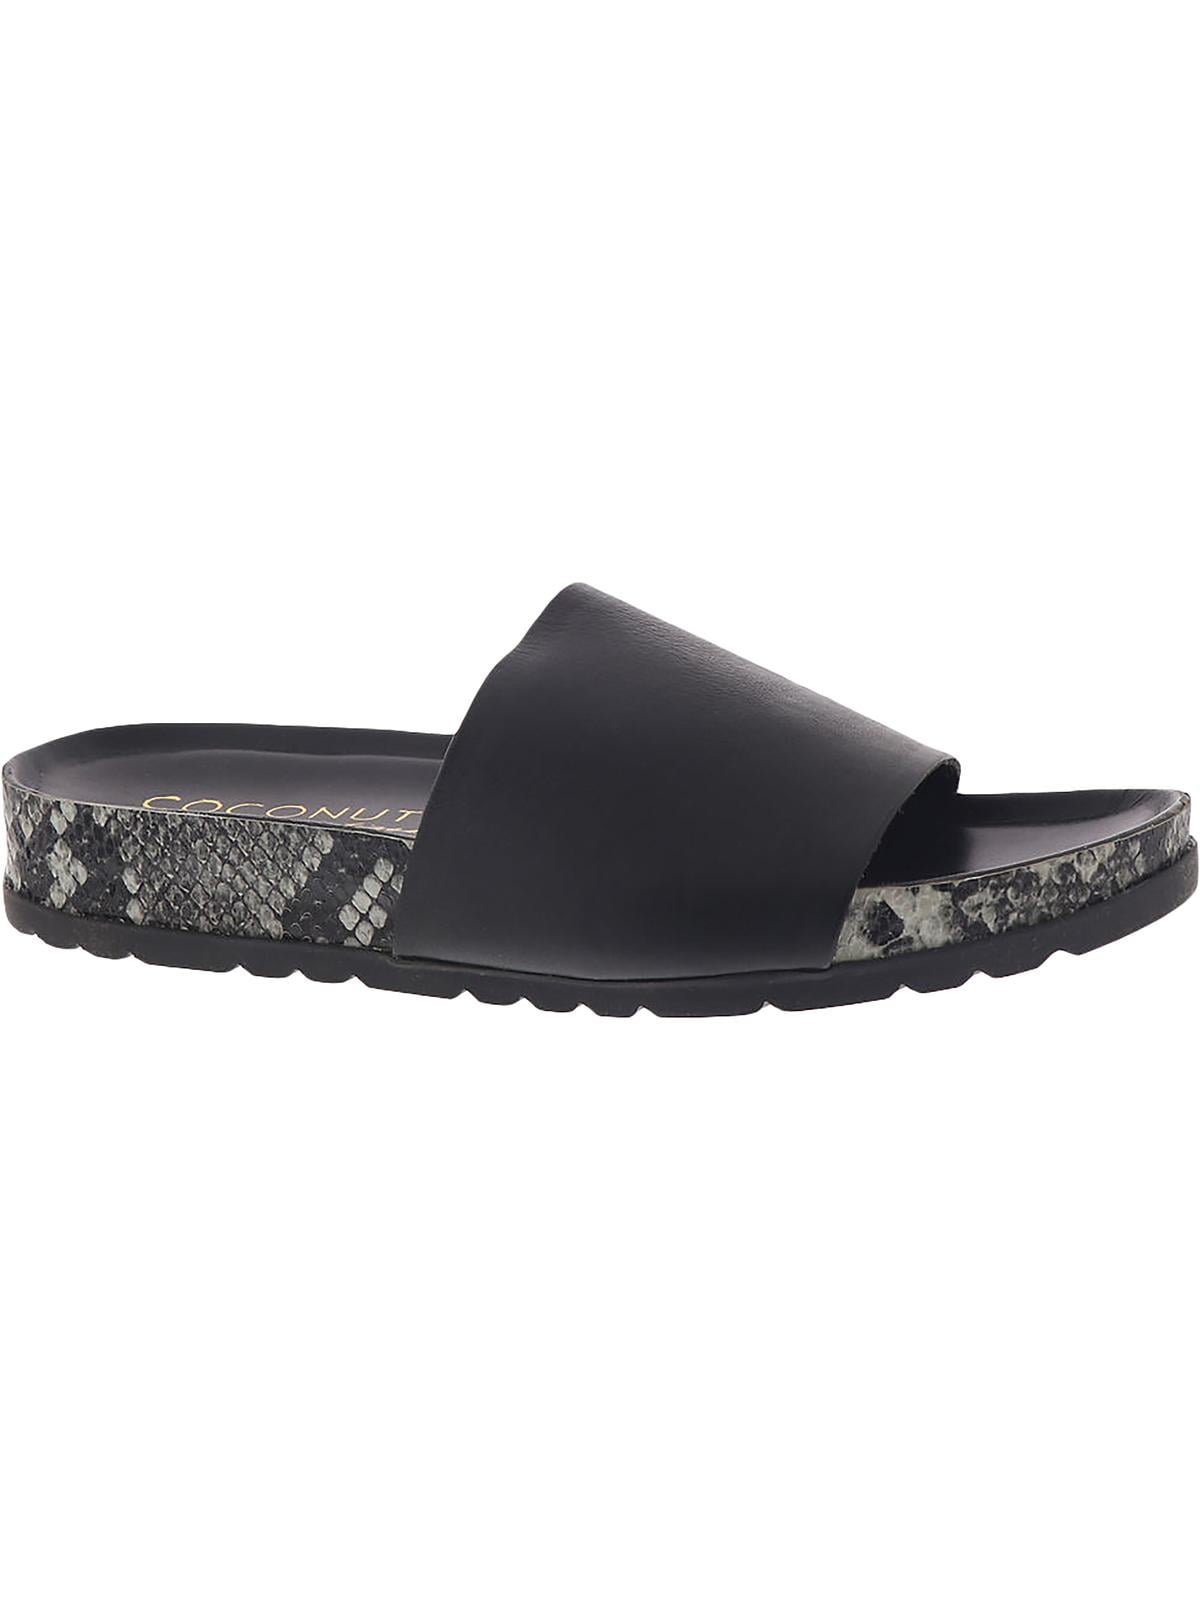 Coconuts by Matisse Womens Shift Leather Metallic Slide Sandals Shoes BHFO 9310 